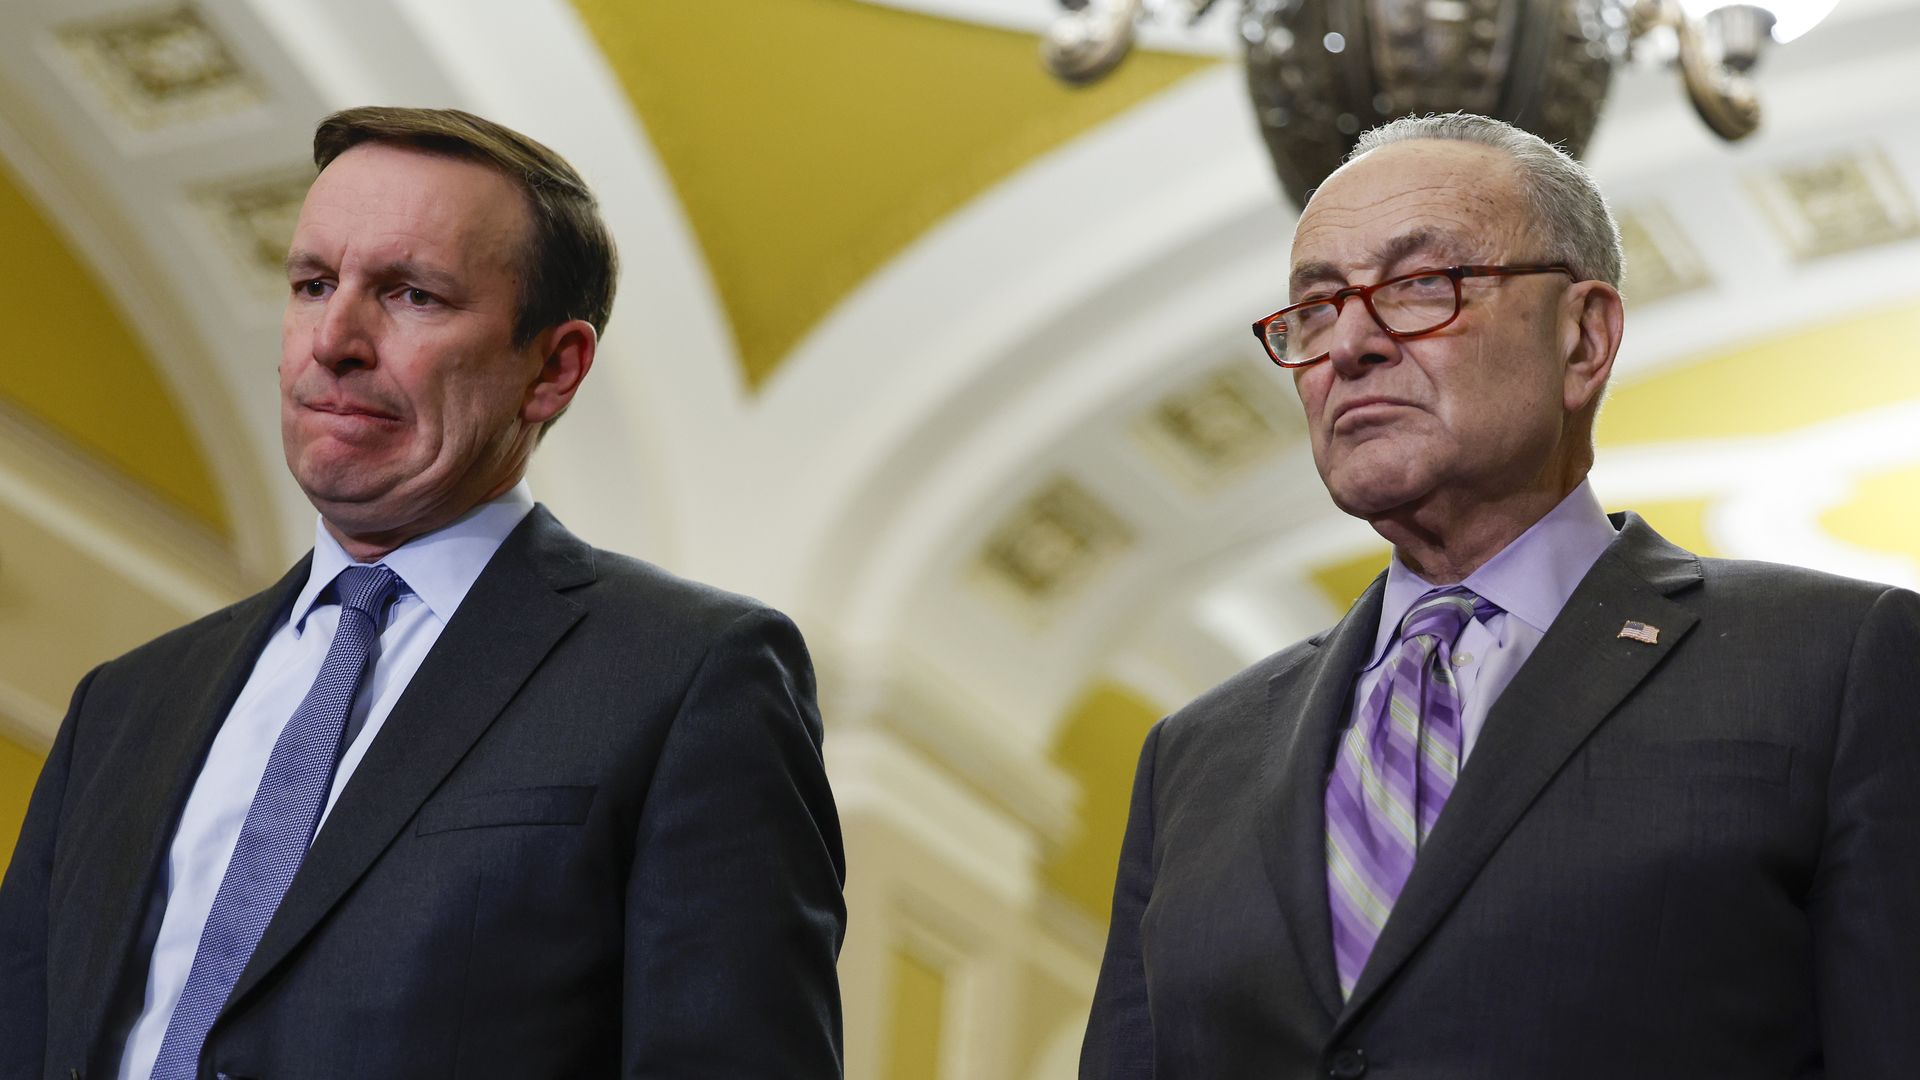 Chris Murphy (D-CT) and Senate Majority Leader Chuck Schumer (D-NY) listen at a news conference after a weekly policy luncheon with Senate Democrats at the U.S. Capitol Building 